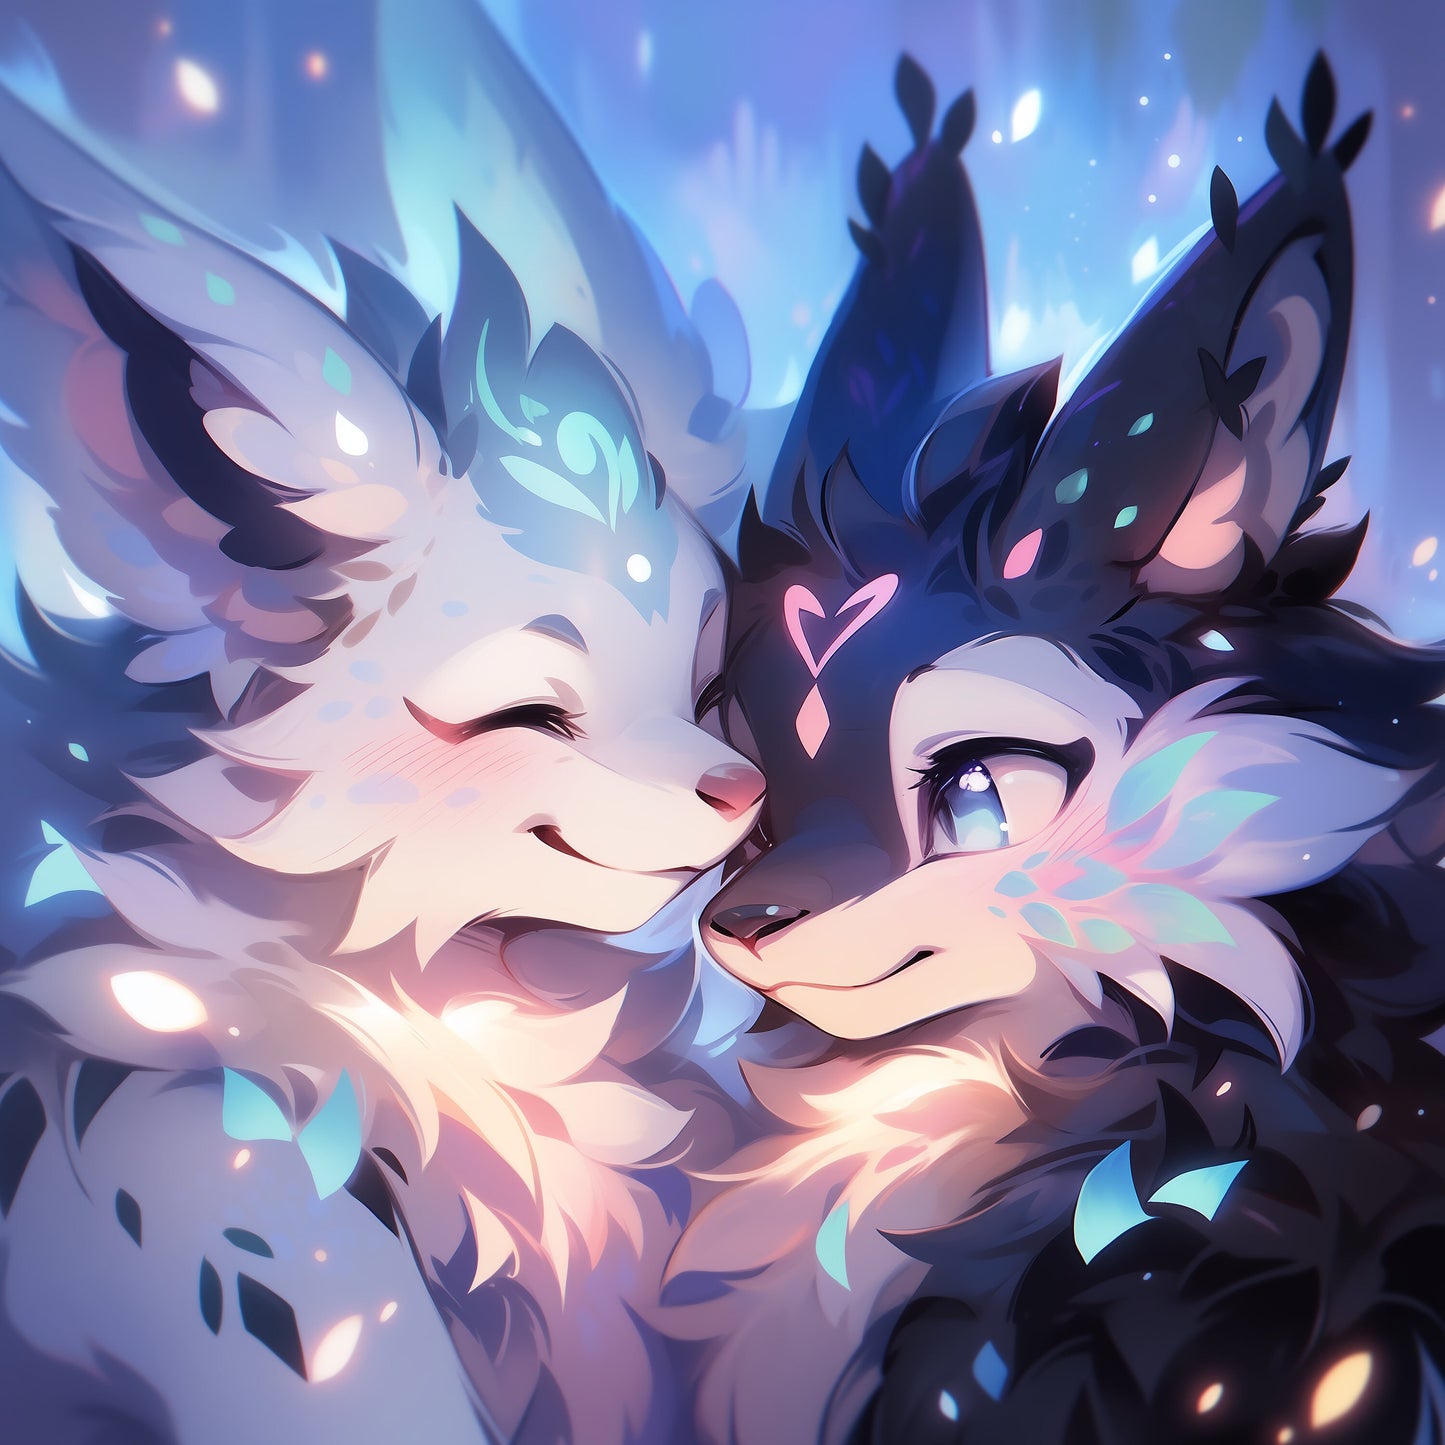 Furry Couple Commission | Digital Painting | Masterpiece Couple Fursona Commission | Fursona Gift for Furry Lovers Fluffy Couple Commission My Store